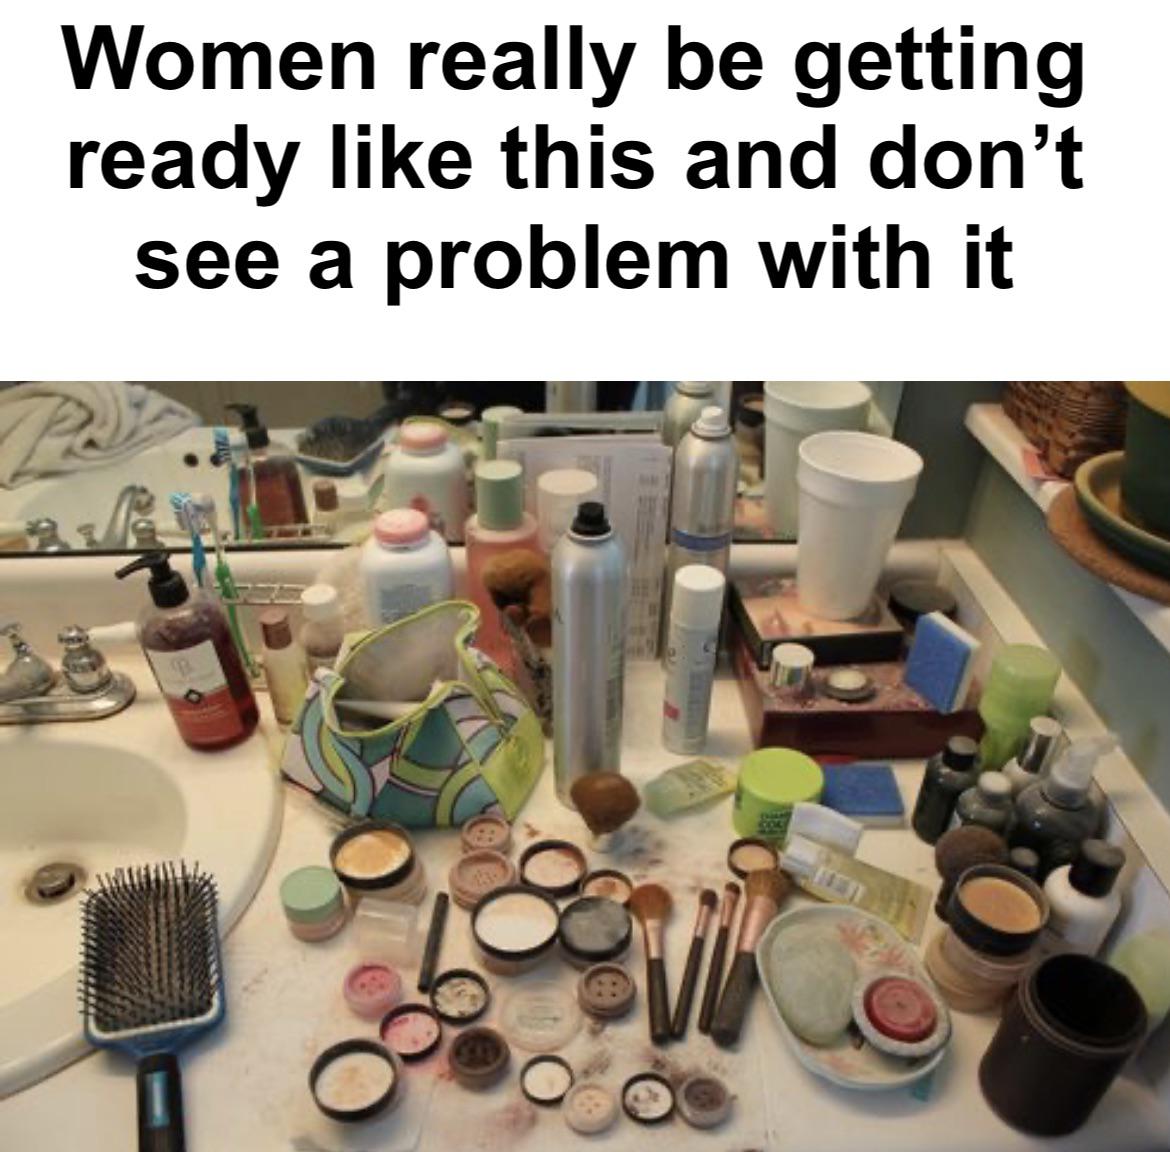 funny memes - have your say - Women really be getting ready this and don't see a problem with it